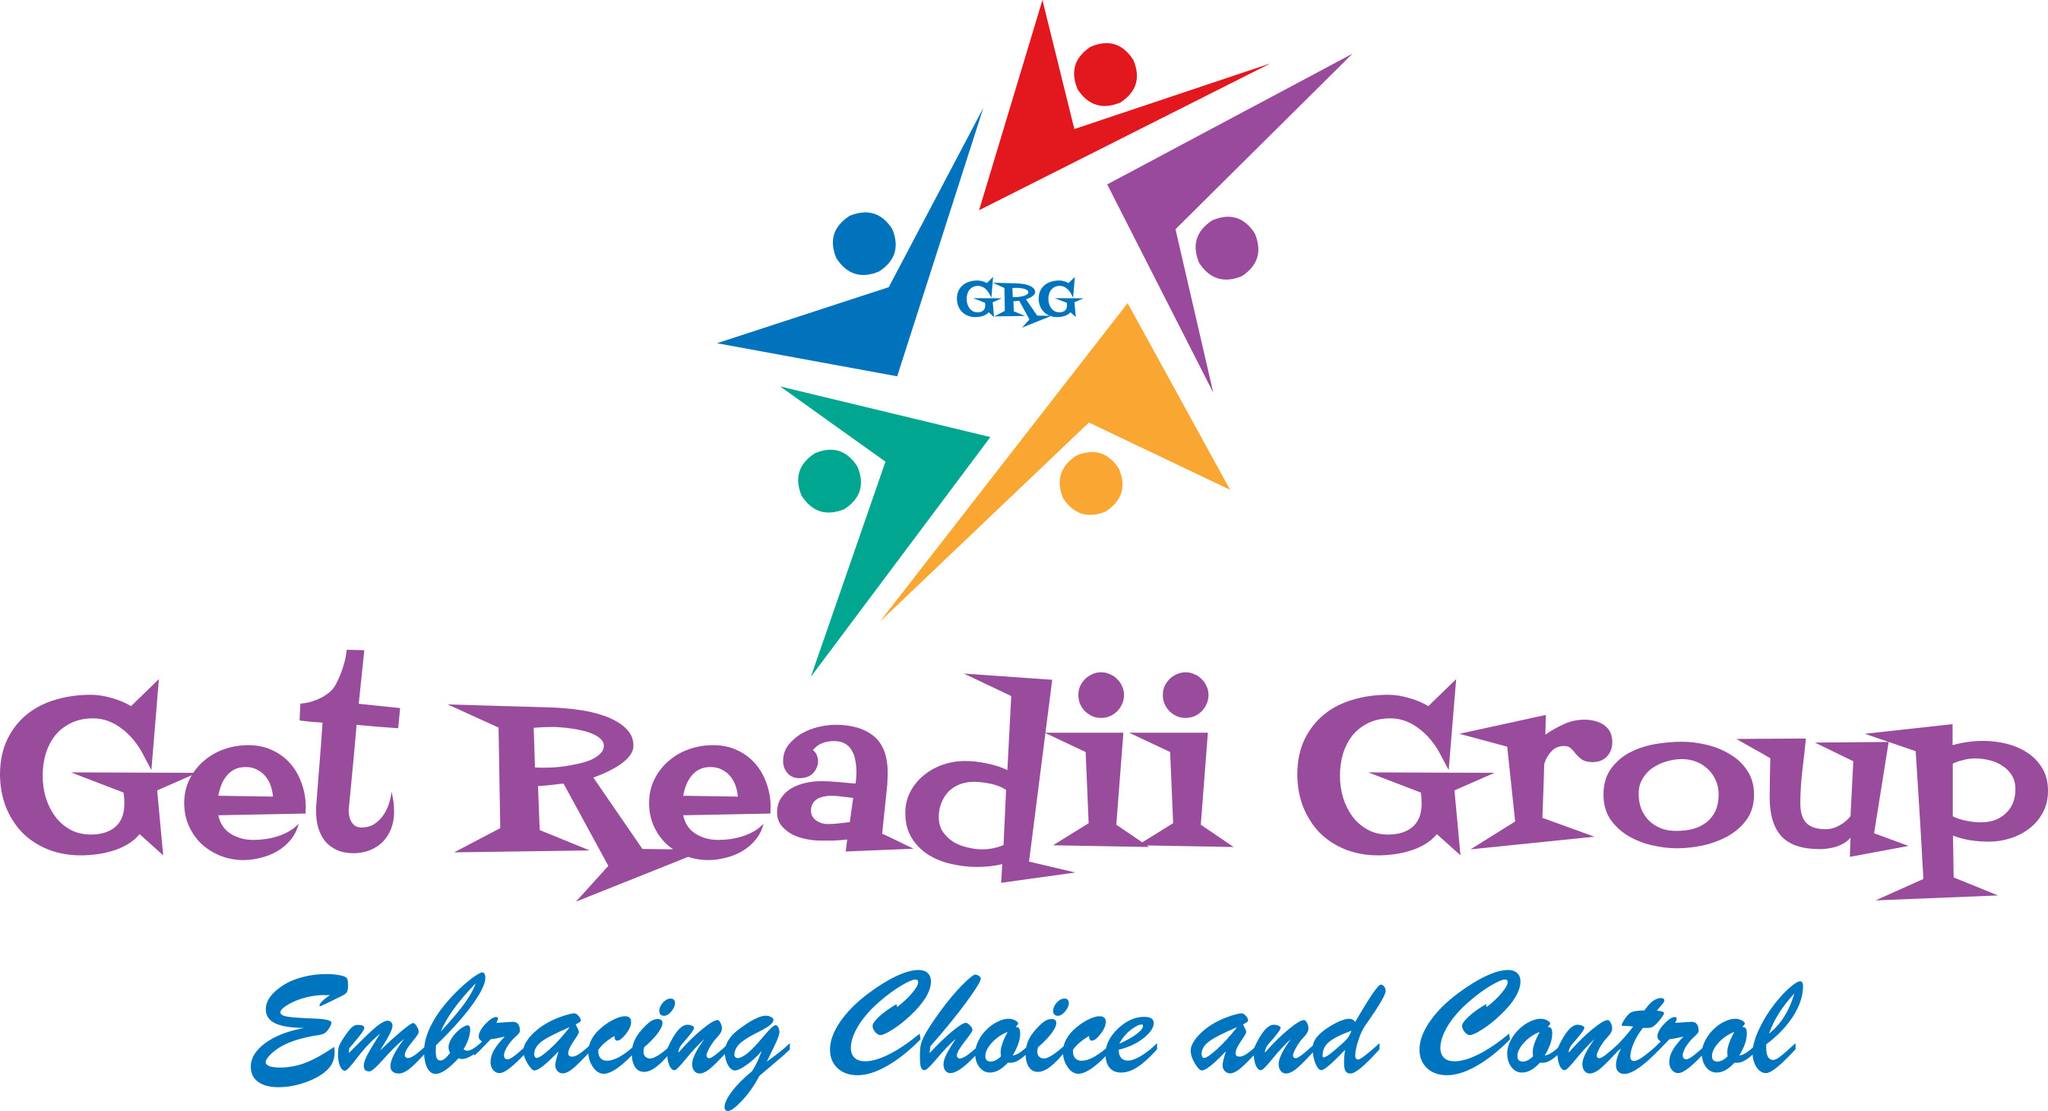 GET READII GROUP